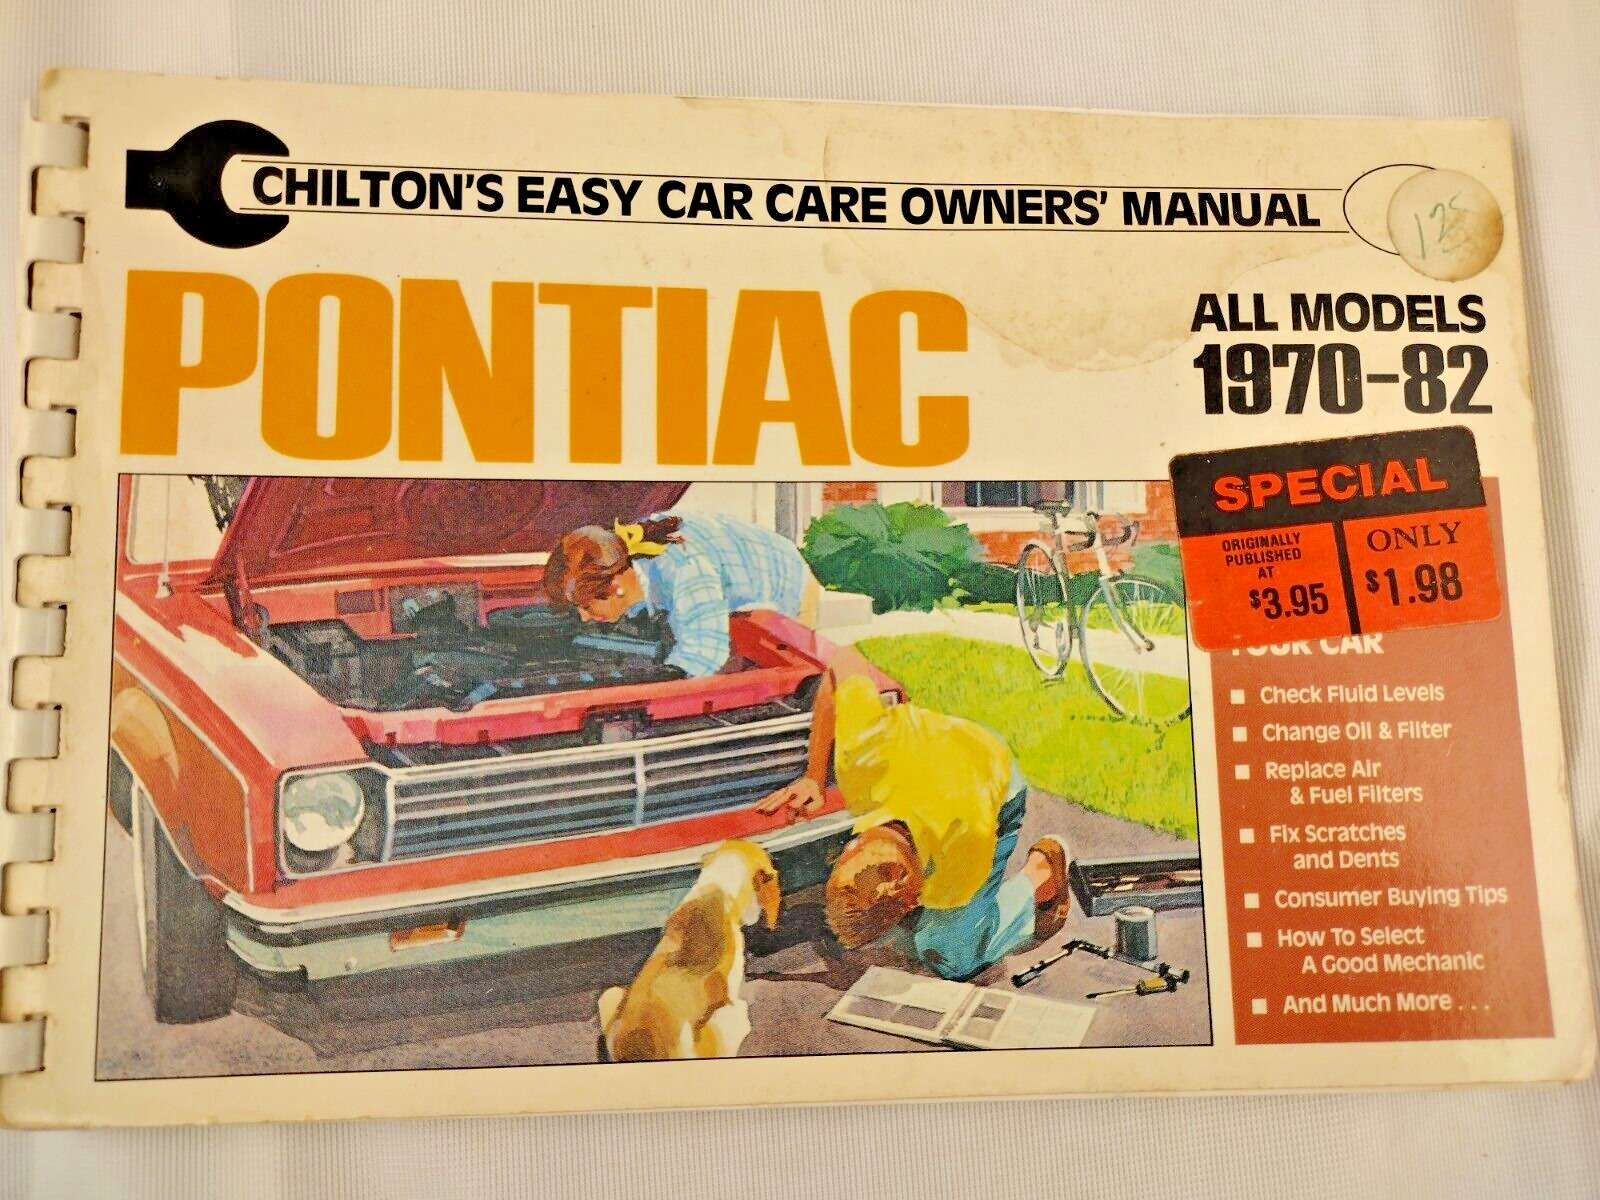 Vintage Chilton’s Easy Car Care Owners Manual Fits 1970-1982 Pontiac All Models